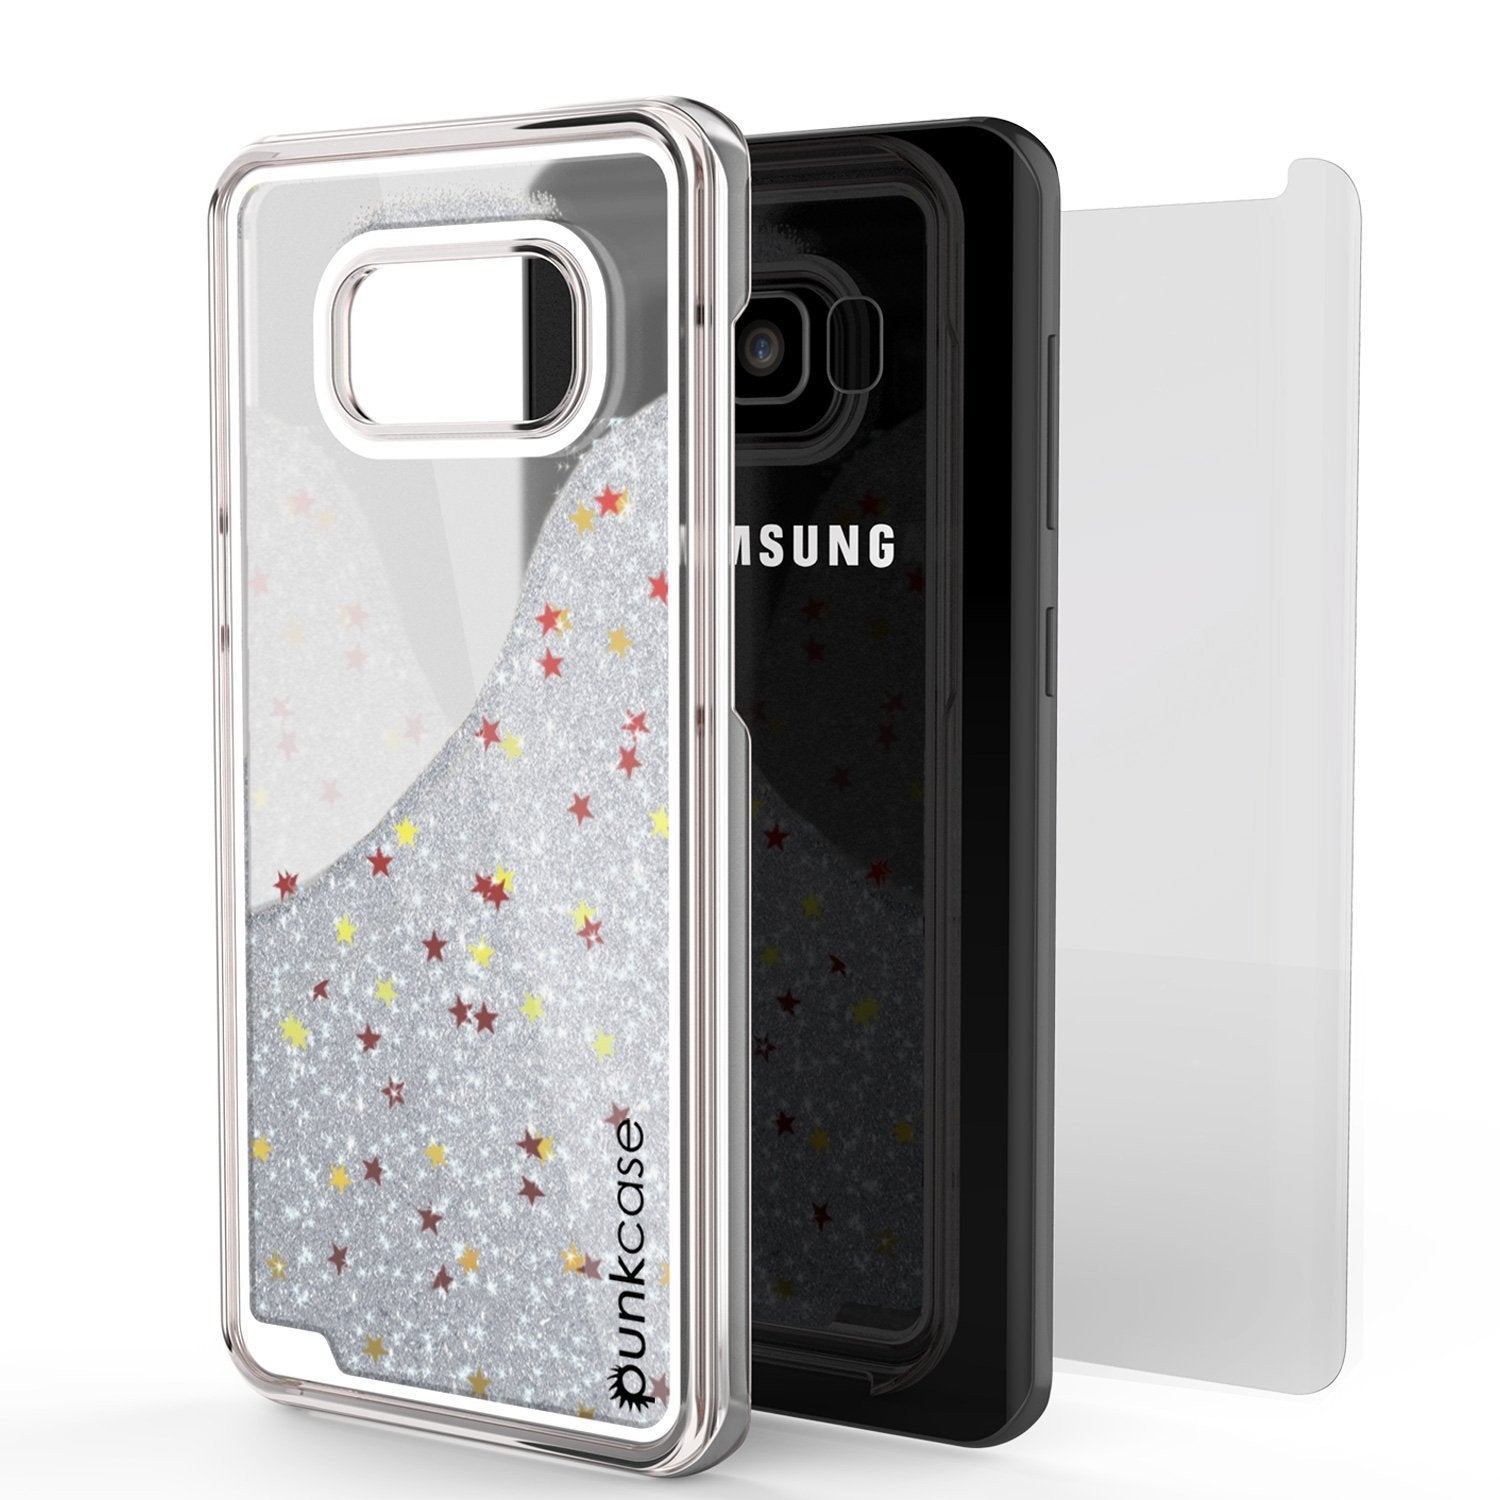 Galaxy S8 Case, Punkcase [Liquid Series] Protective Dual Layer Floating Glitter Cover with lots of Bling & Sparkle + PunkShield Screen Protector for Samsung S8 [Silver] - PunkCase NZ